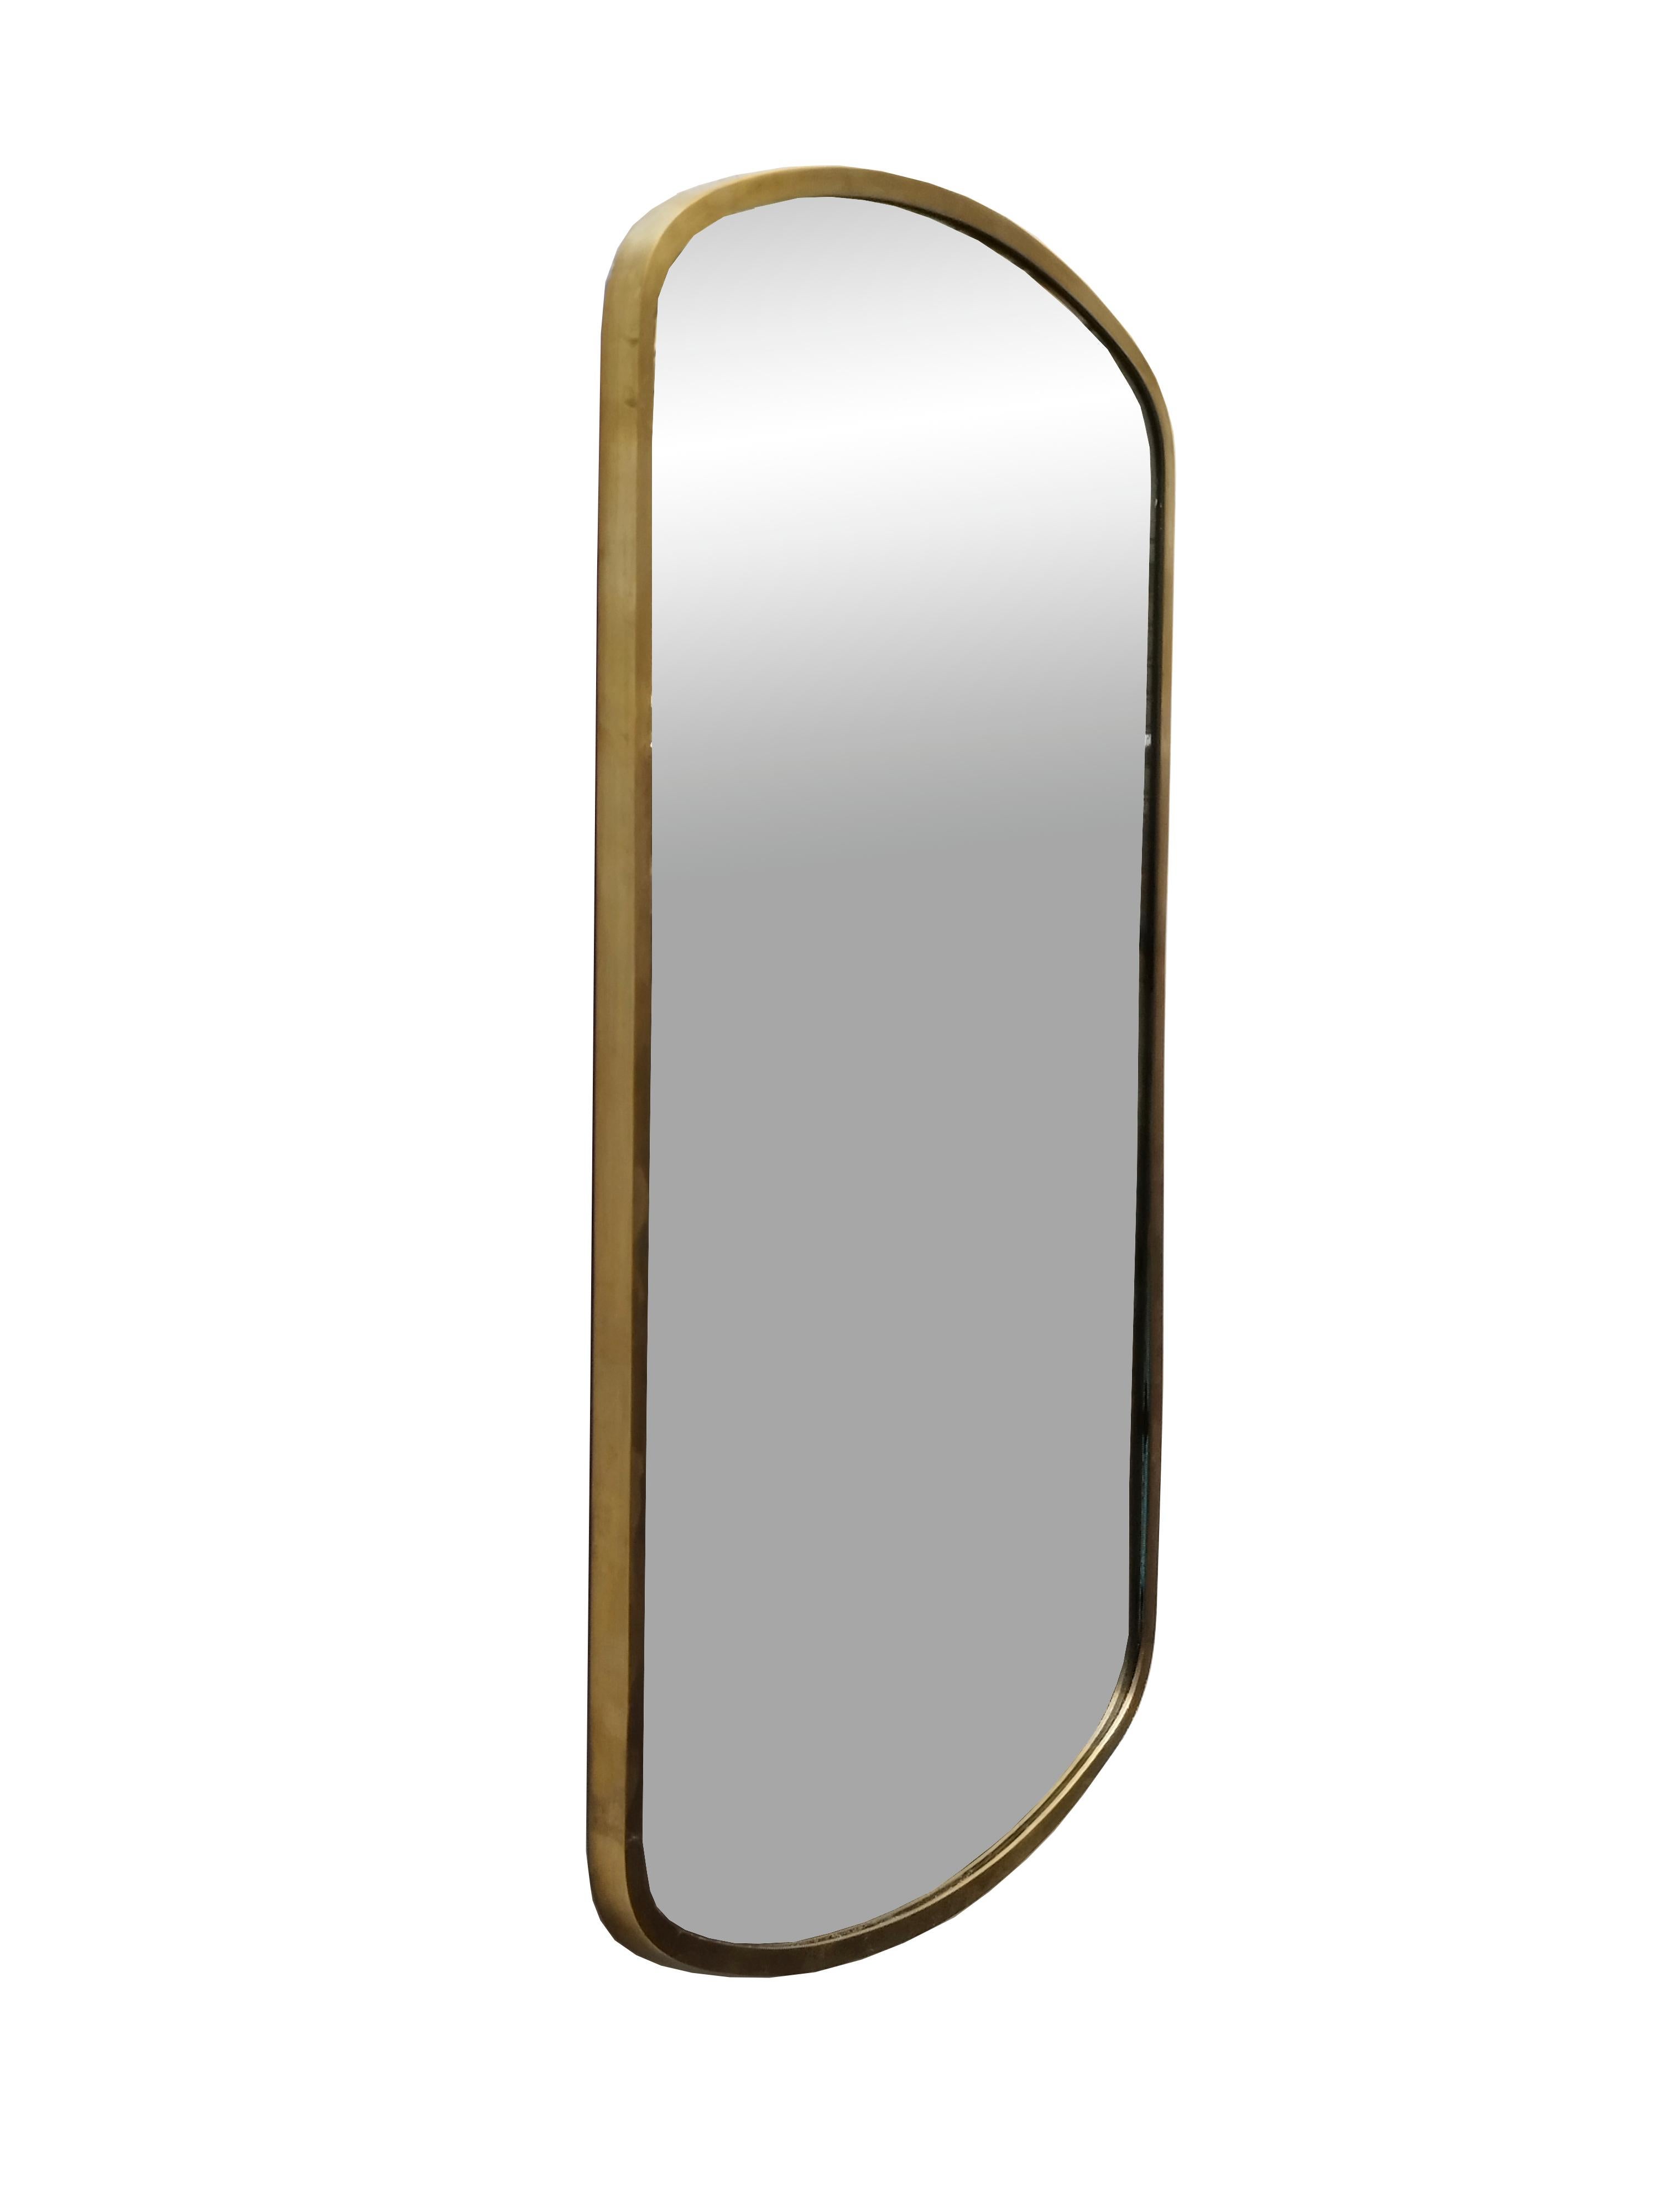 Gorgeous and elegant vintage wall mirror with solid brass frame and crystal mirror glass. 